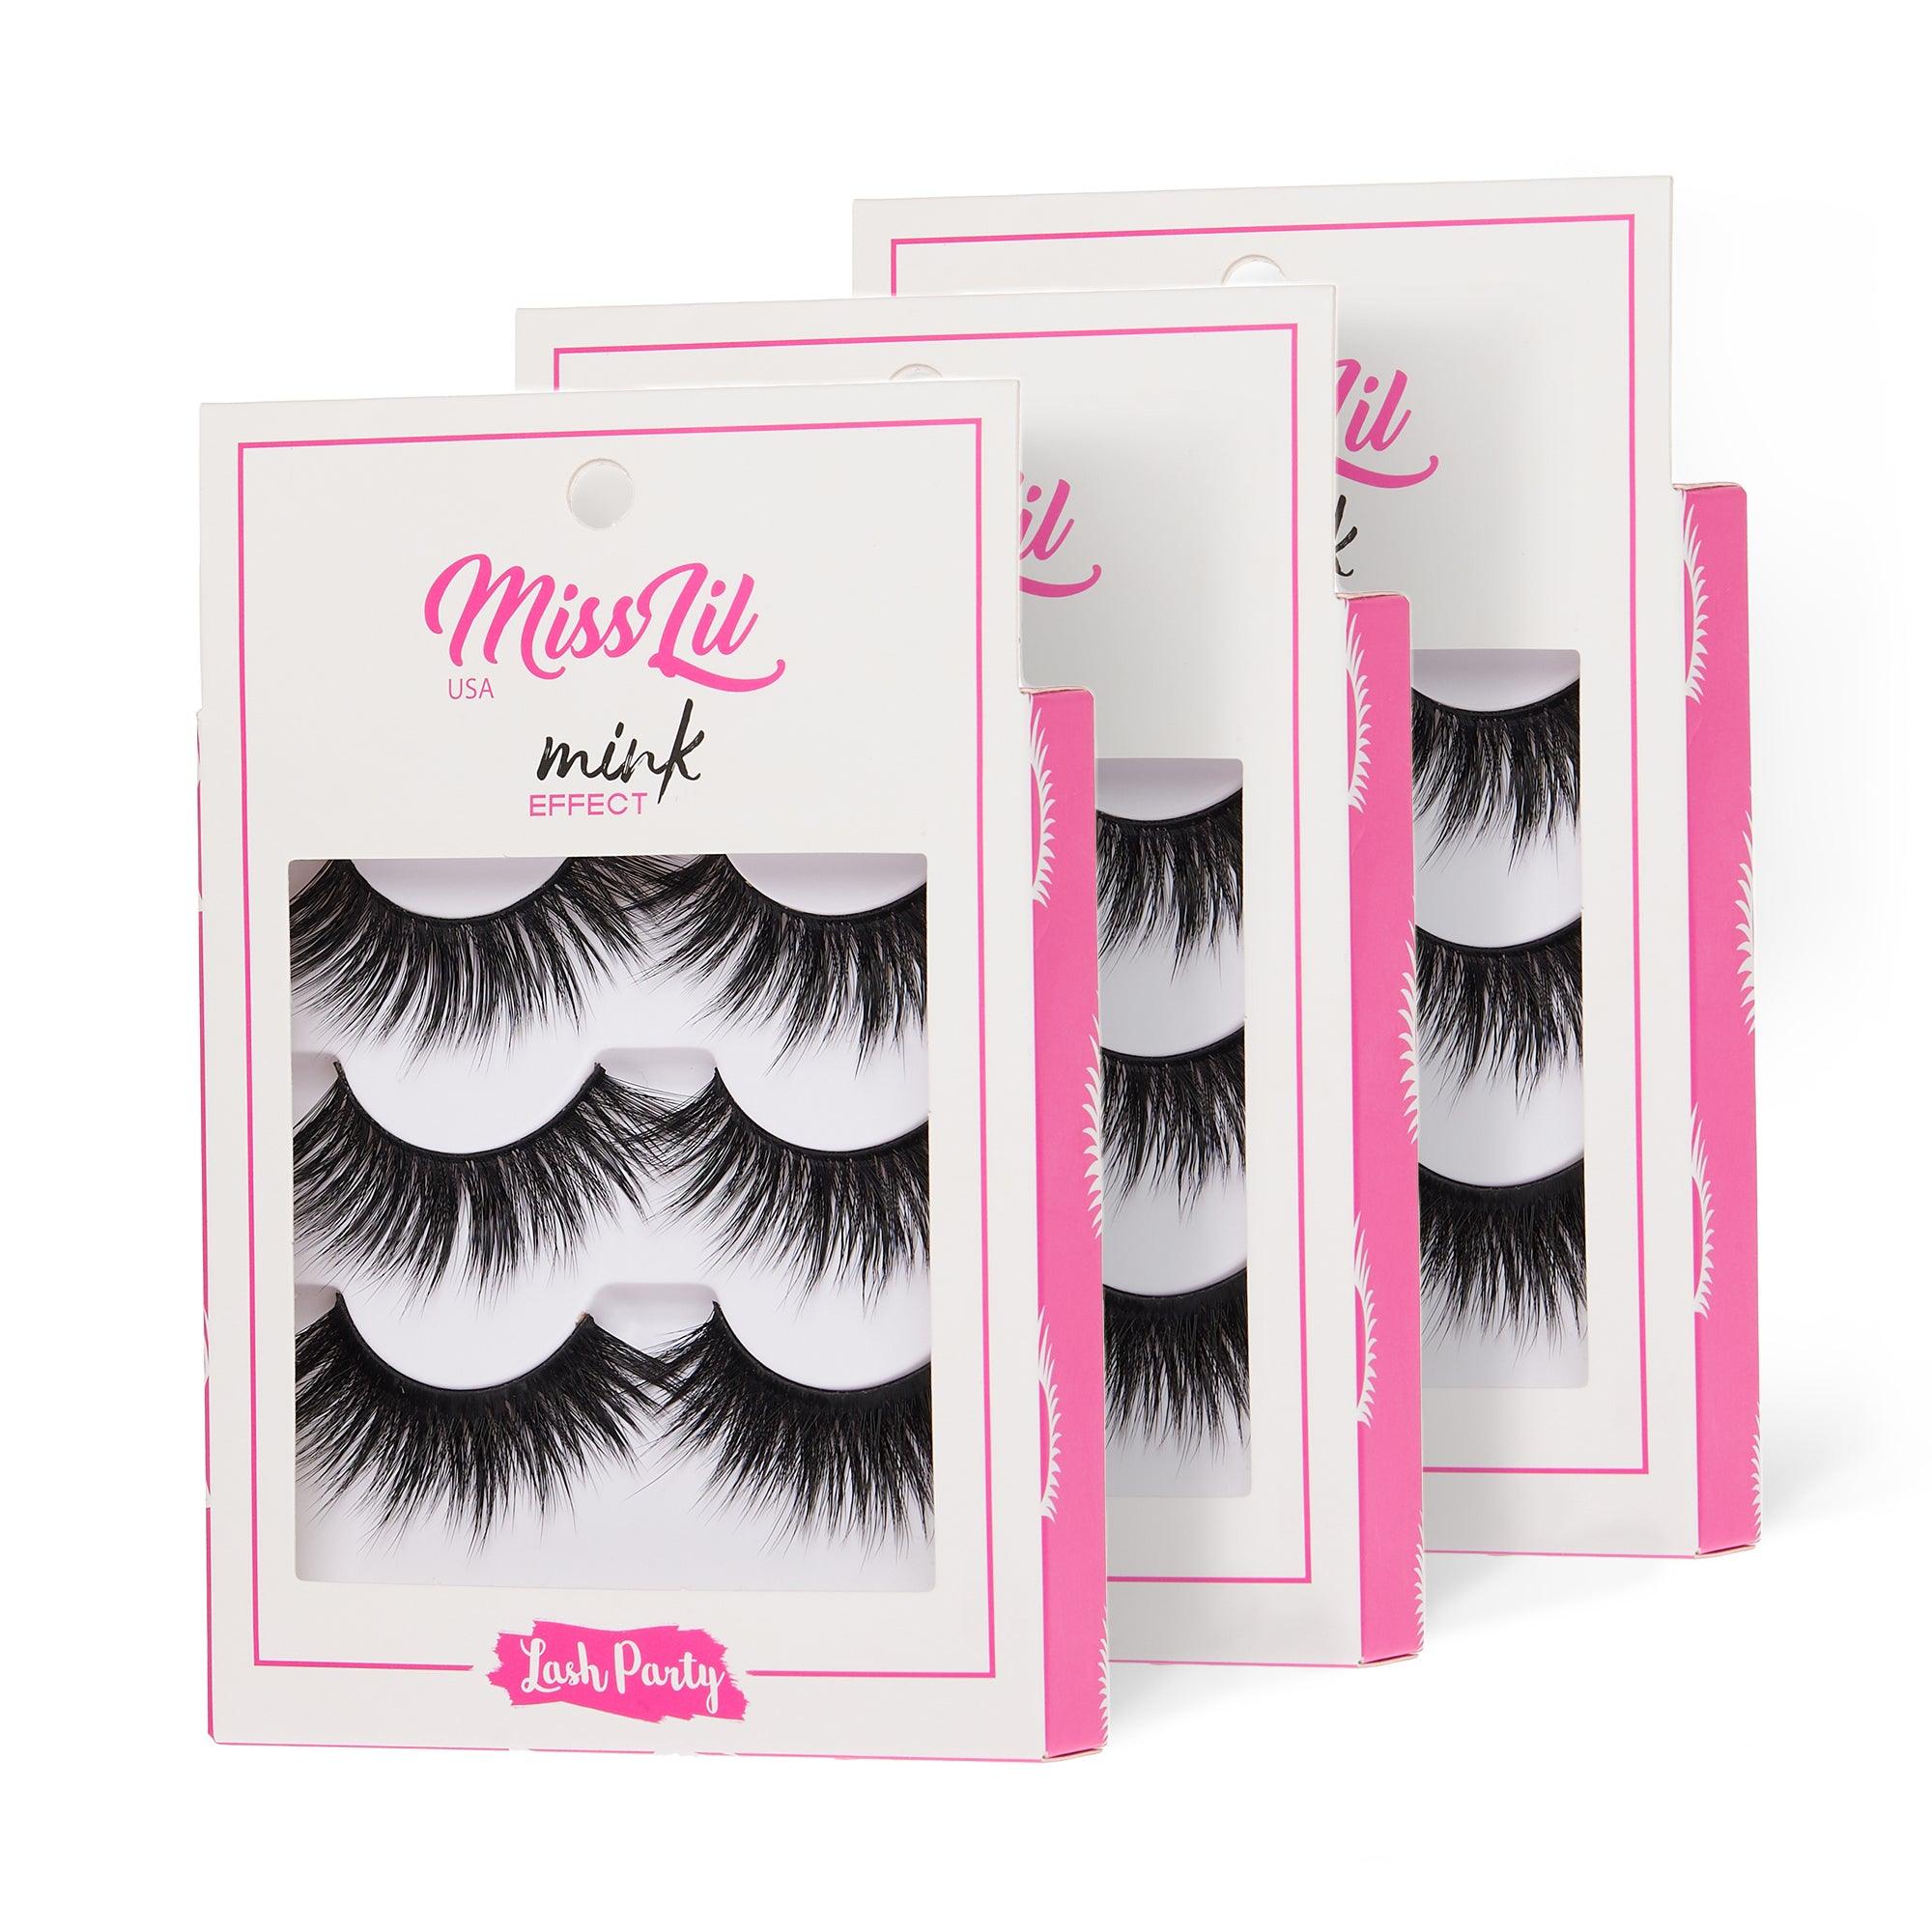 3-Pair Faux Mink Effect Eyelashes - Lash Party Collection #24 - Pack of 3